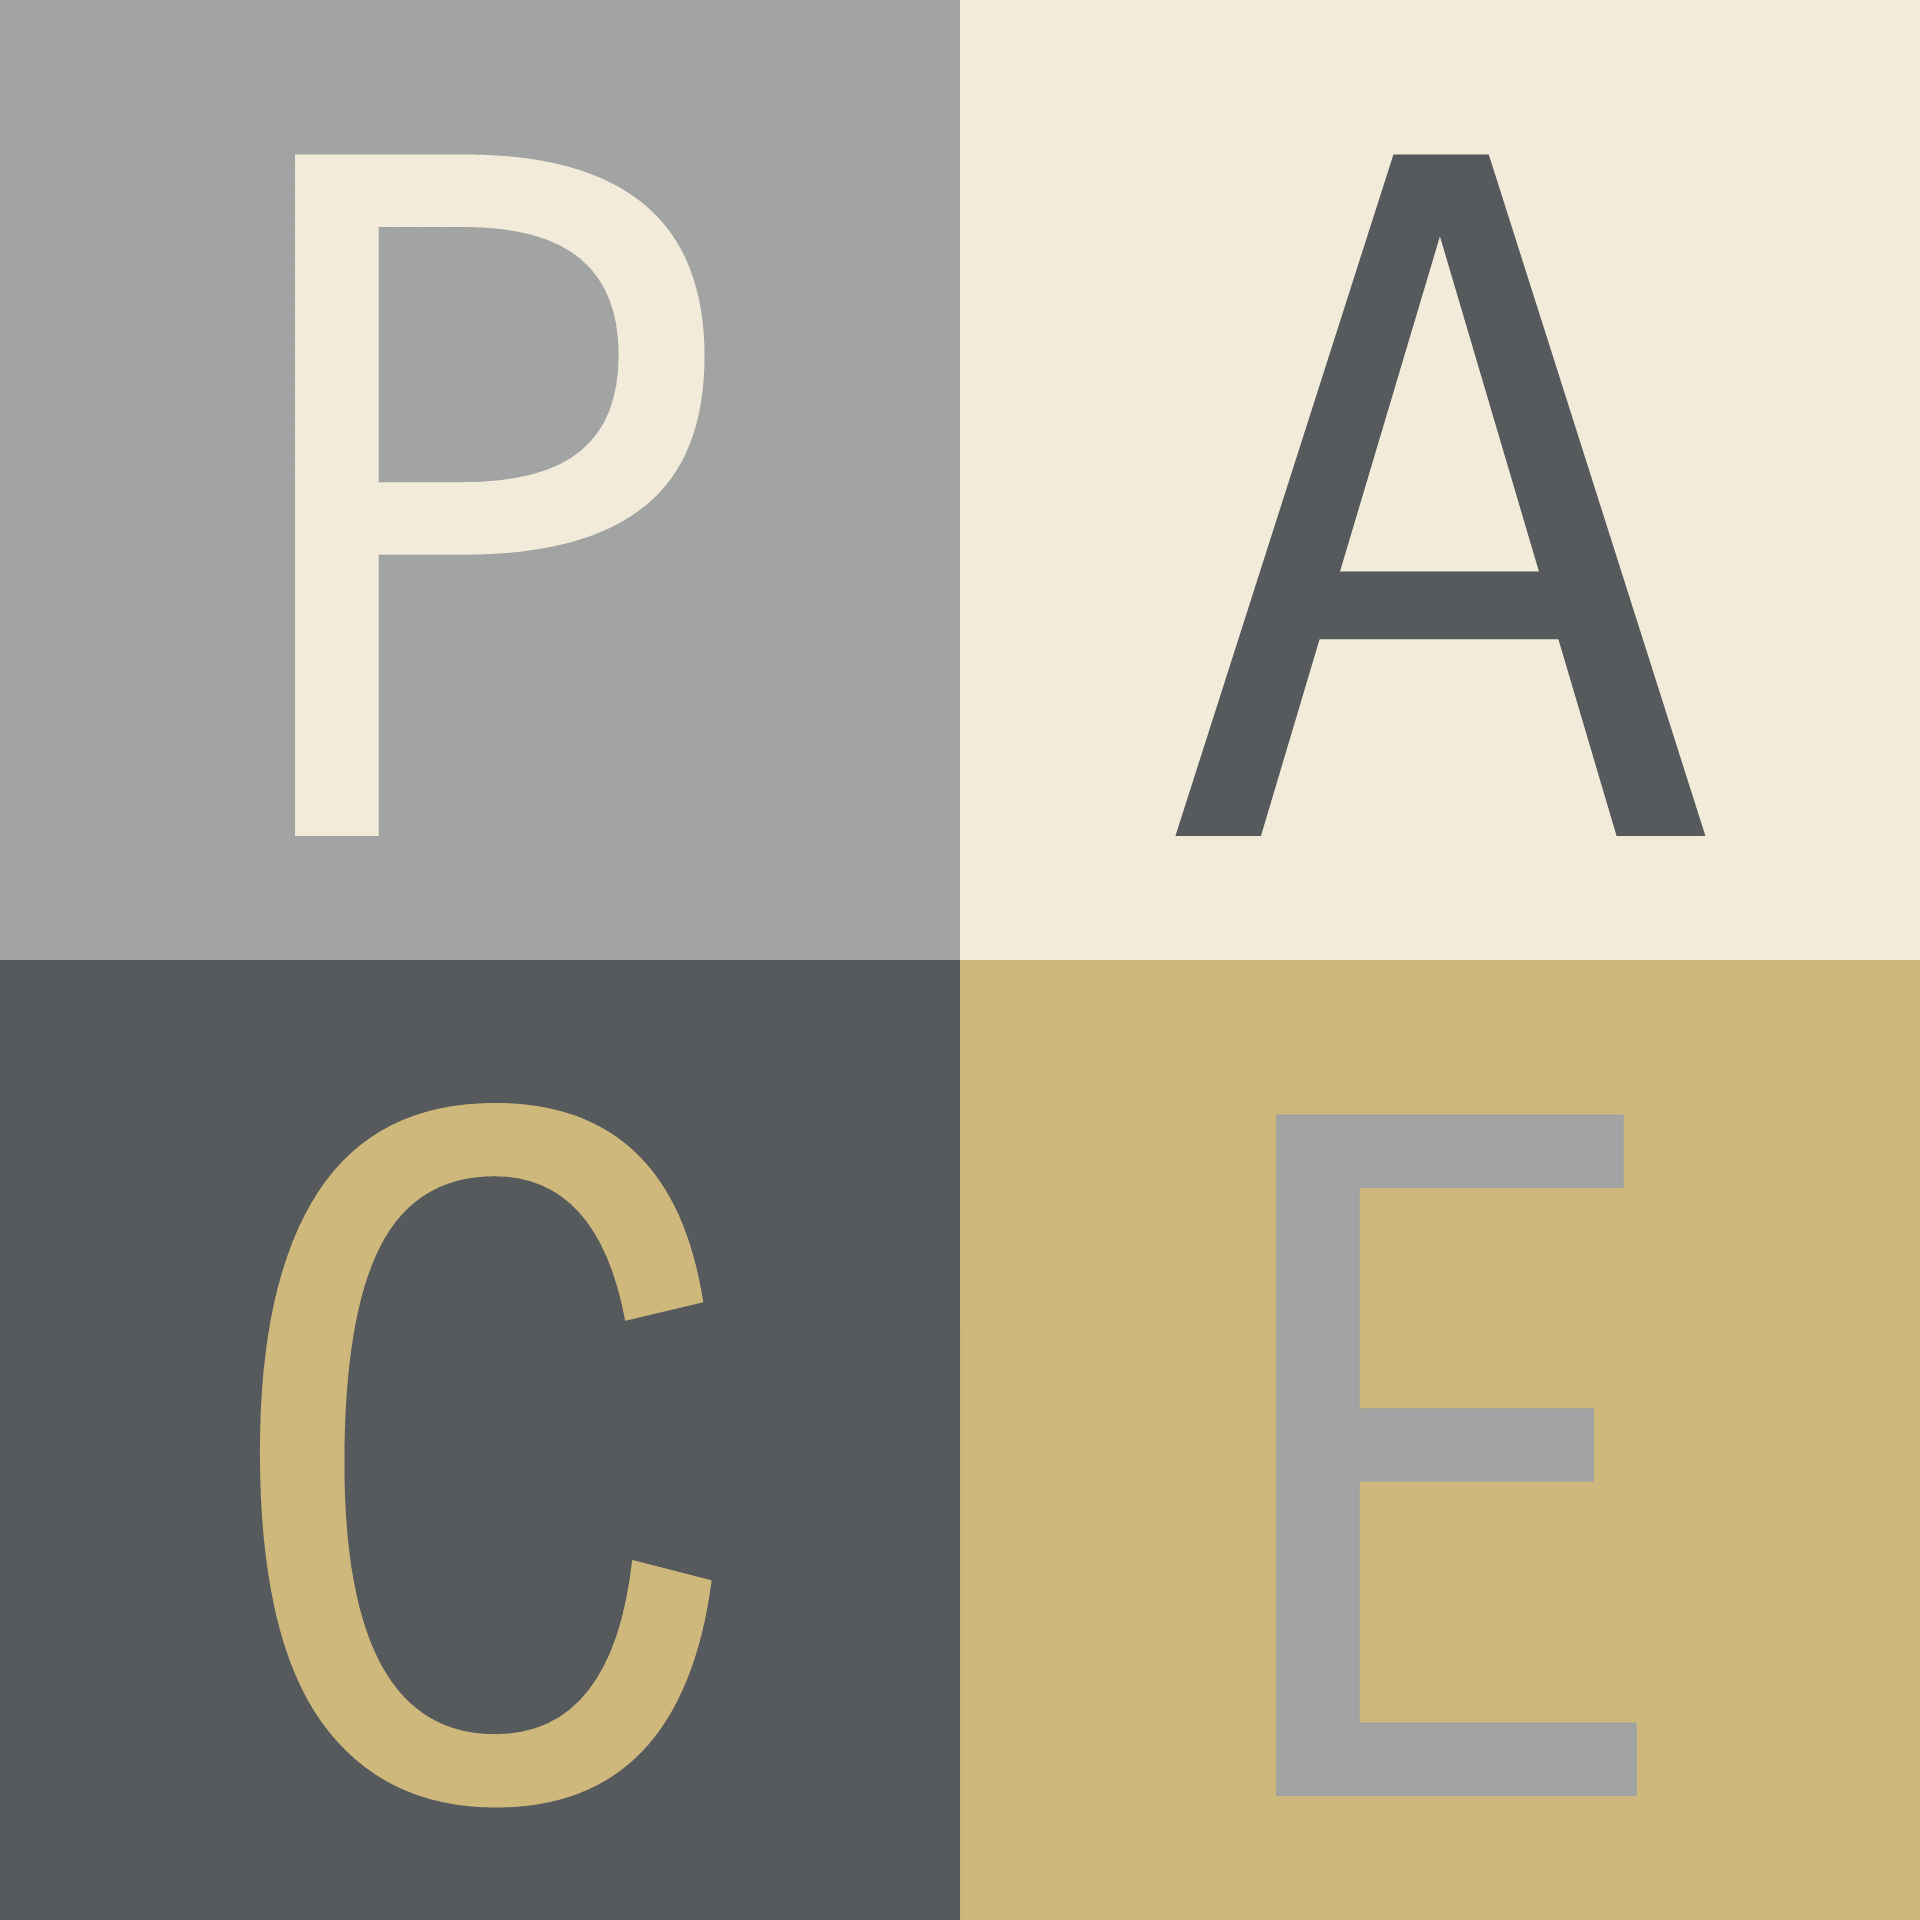 PACE logo